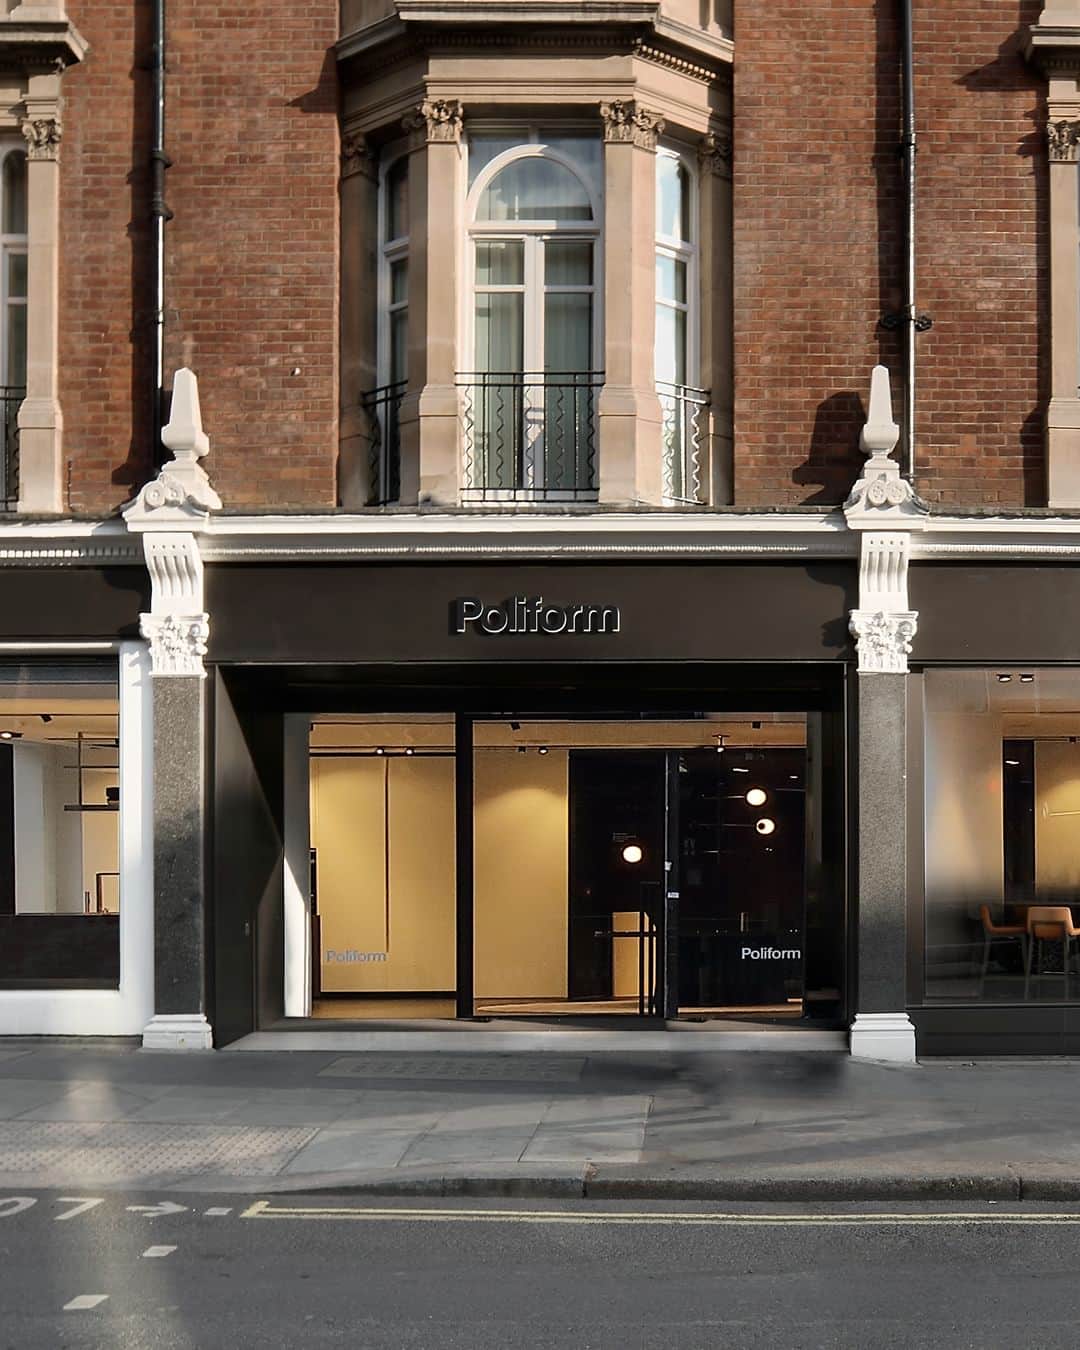 Poliform|Varennaのインスタグラム：「Poliform’s Wigmore Street showroom, at the heart of Marylebone’s design district, has been recently renovated: first opened in 2019, the showroom showcases the company’s core products in over 5,000 square feet of showroom space. Spread over two floors, the store allows clients to immerse themselves in the world of Poliform and admire the varied collection in its entirety, including kitchens, finely crafted furniture, storage systems, bookcases, beds: a range of unique, stylishly designed products perfect for all kinds of lifestyles and living spaces. Discover Poliform London Wigmore street showroom on poliform.com  #Poliform #Design #MadeInItaly #PoliformStore #PoliformShowroom #Furniture #FurnitureShop #FurnitureStore #PoliformLondon #London #wigmorestreet  #londonfurniture #londonfurnitureshop」